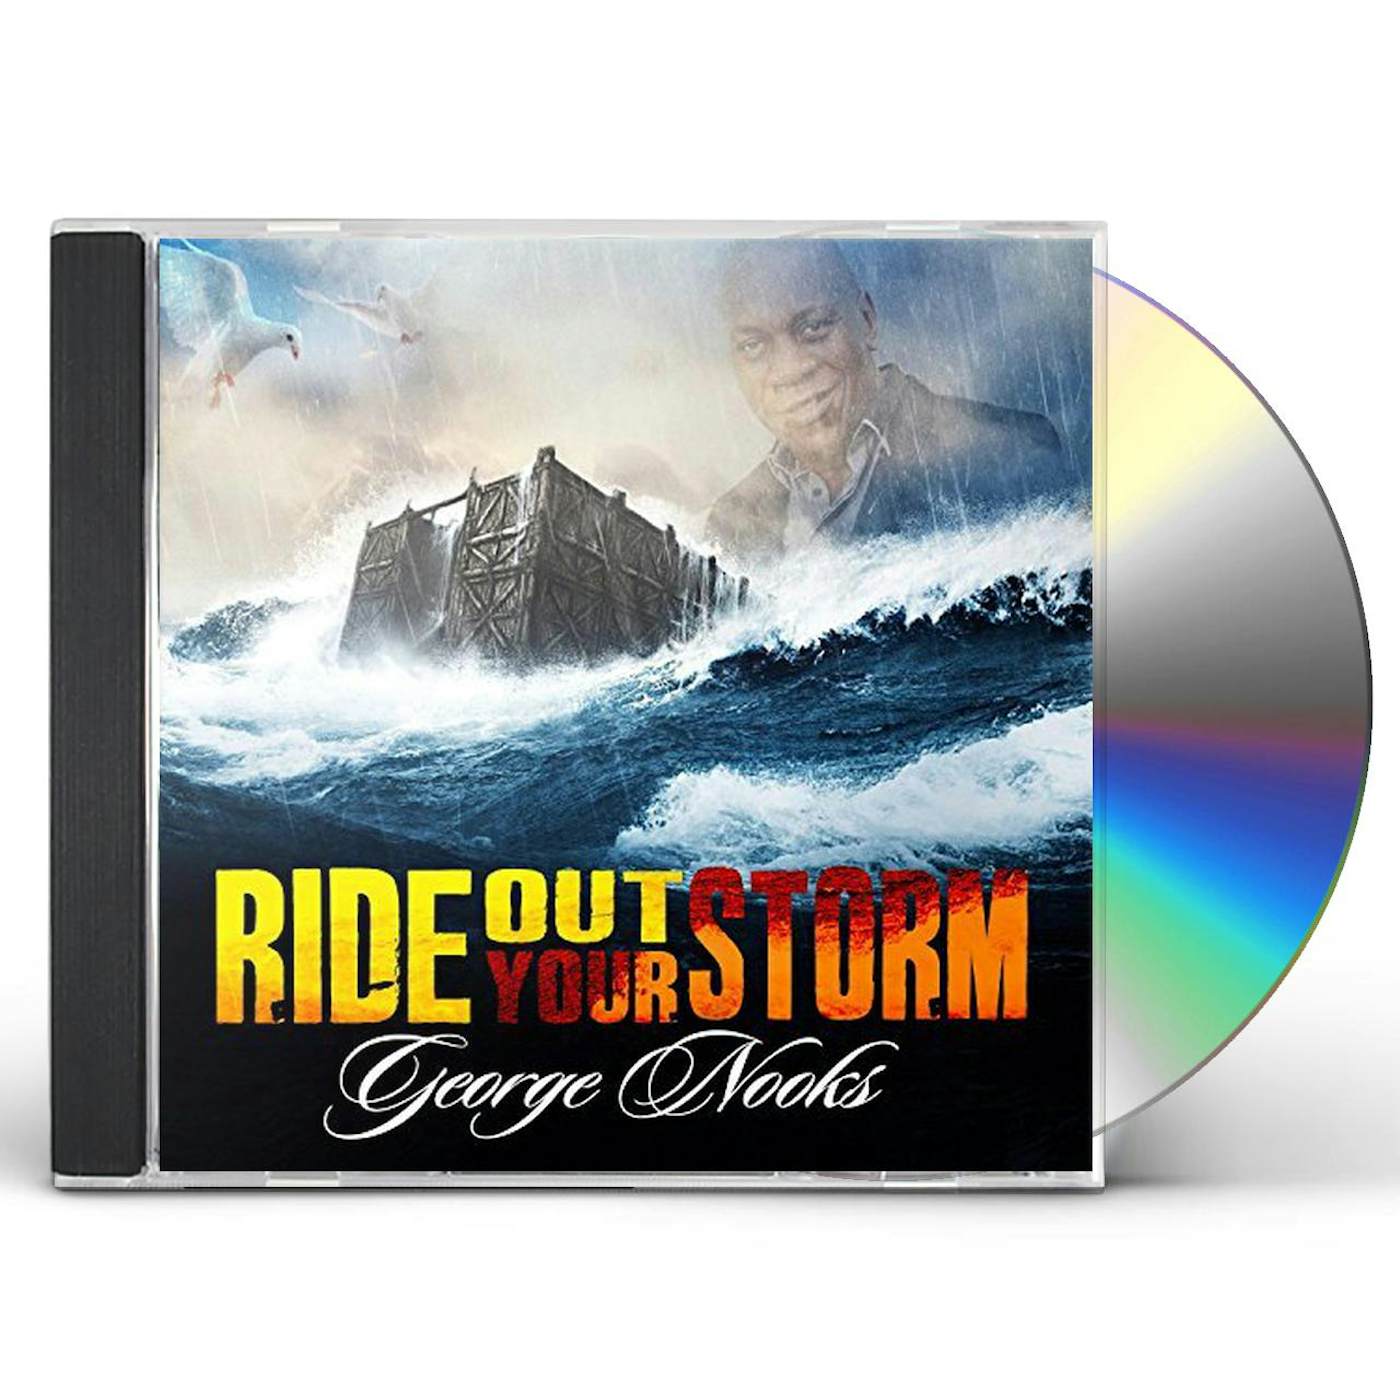 George Nooks RIDE OUT YOUR STORM CD